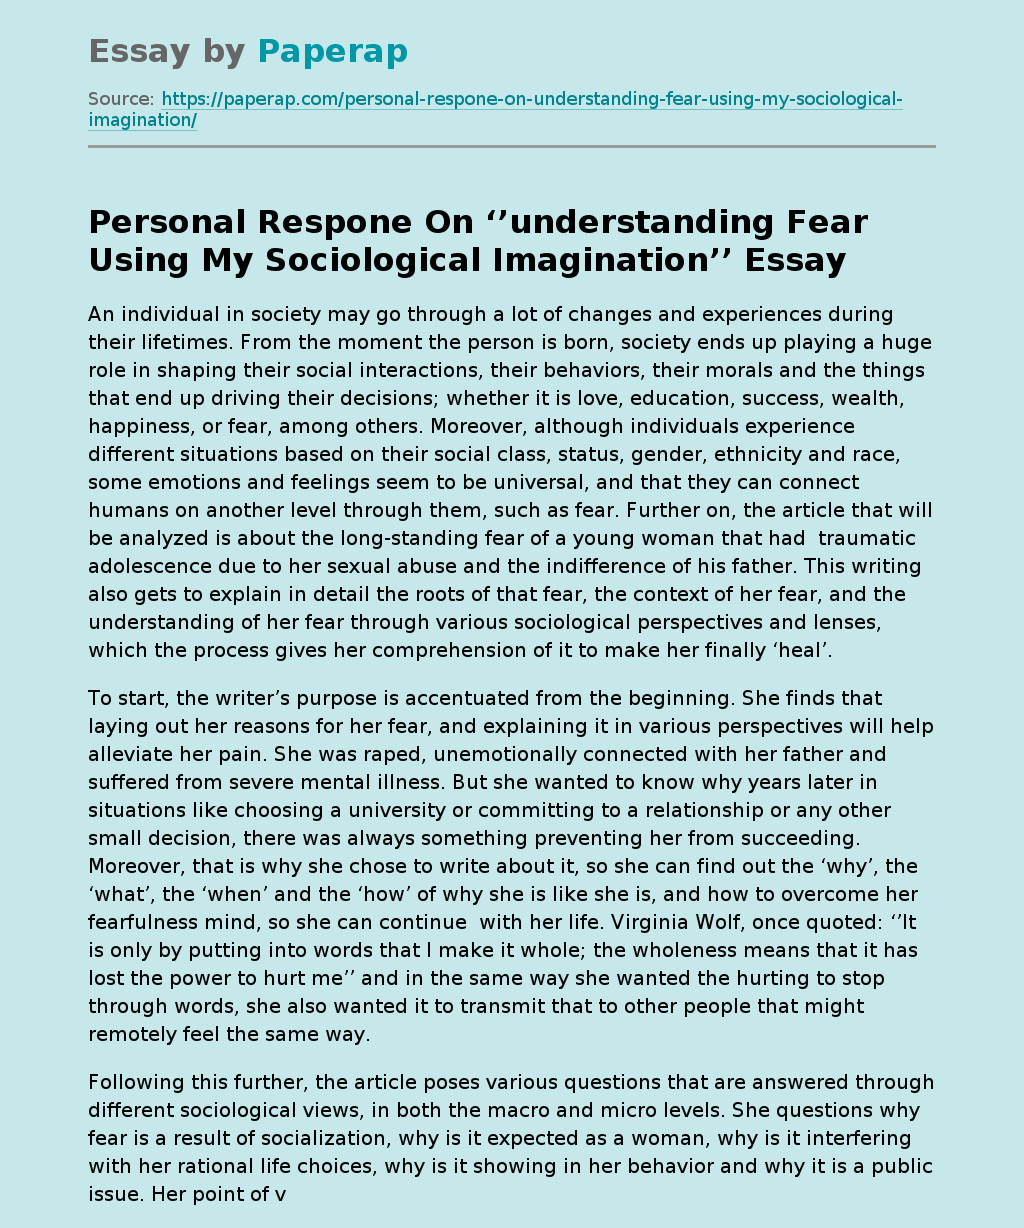 Personal Respone On ‘’understanding Fear Using My Sociological Imagination’’